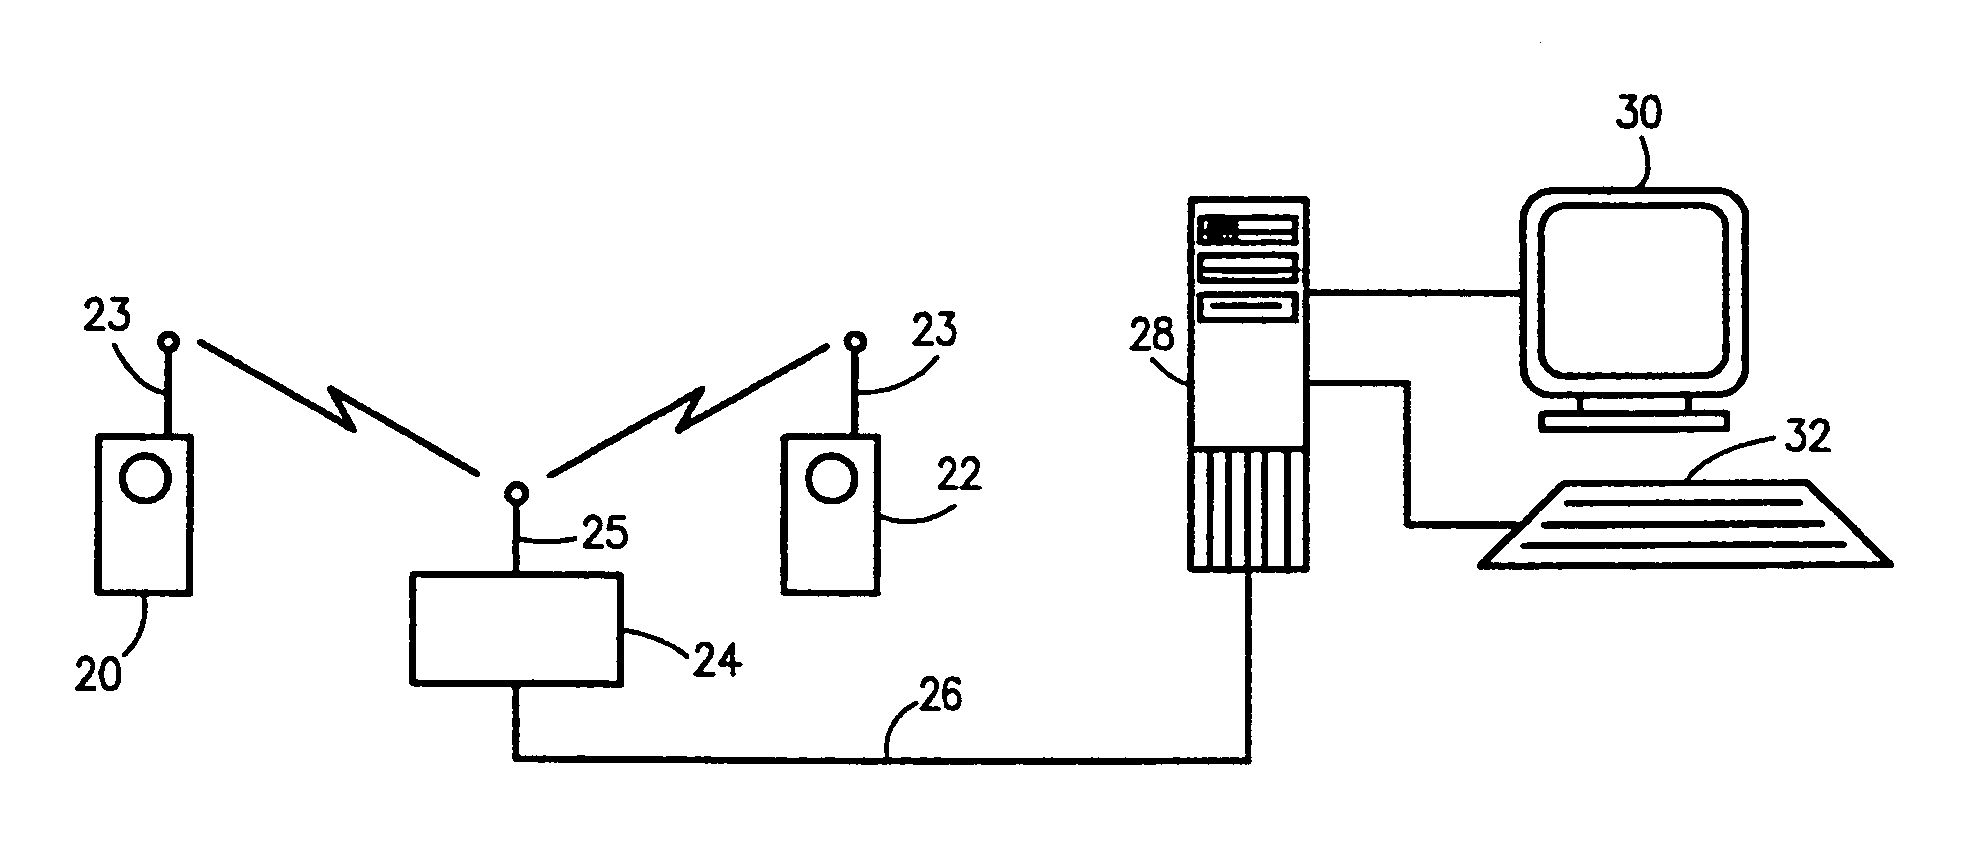 Multimedia surveillance and monitoring system including network configuration